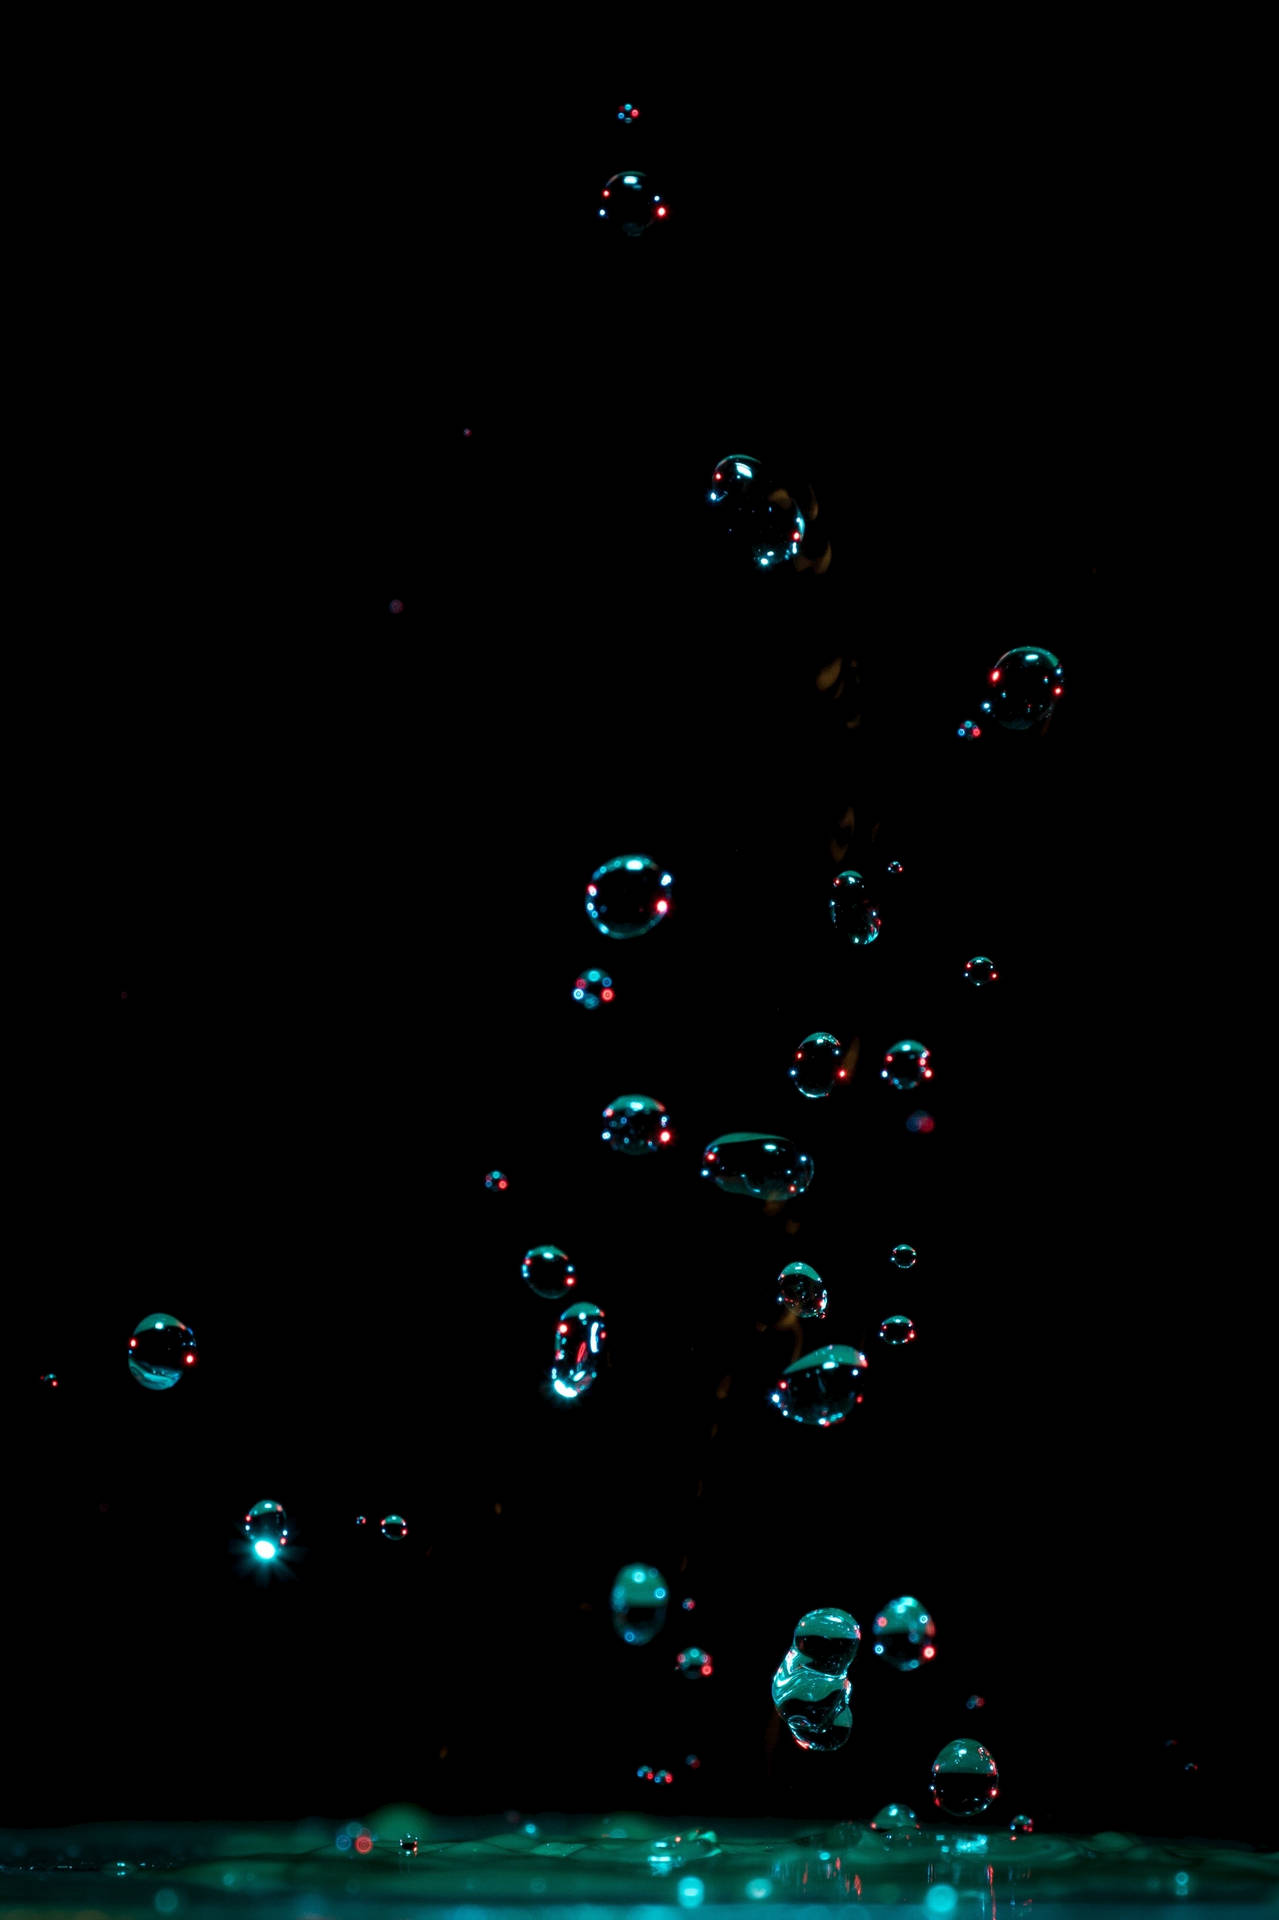 IPhone 11 Pro Max Water Droplets Wallpaper